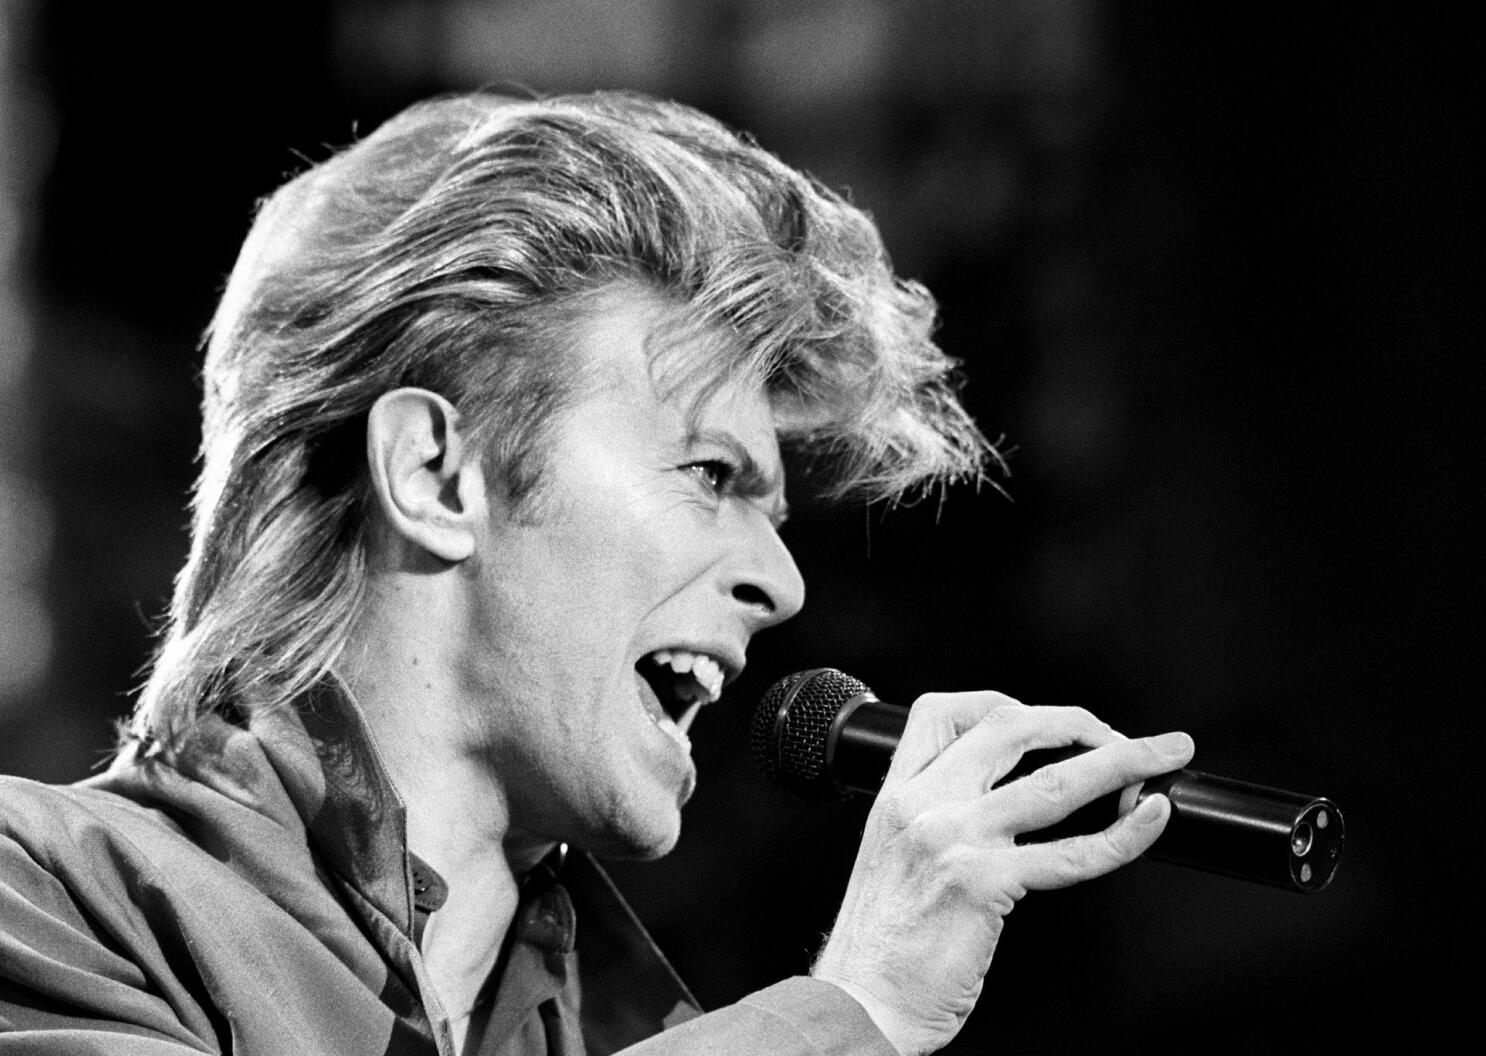 David Bowie Dies at 69; Star Transcended Music, Art and Fashion - The New  York Times